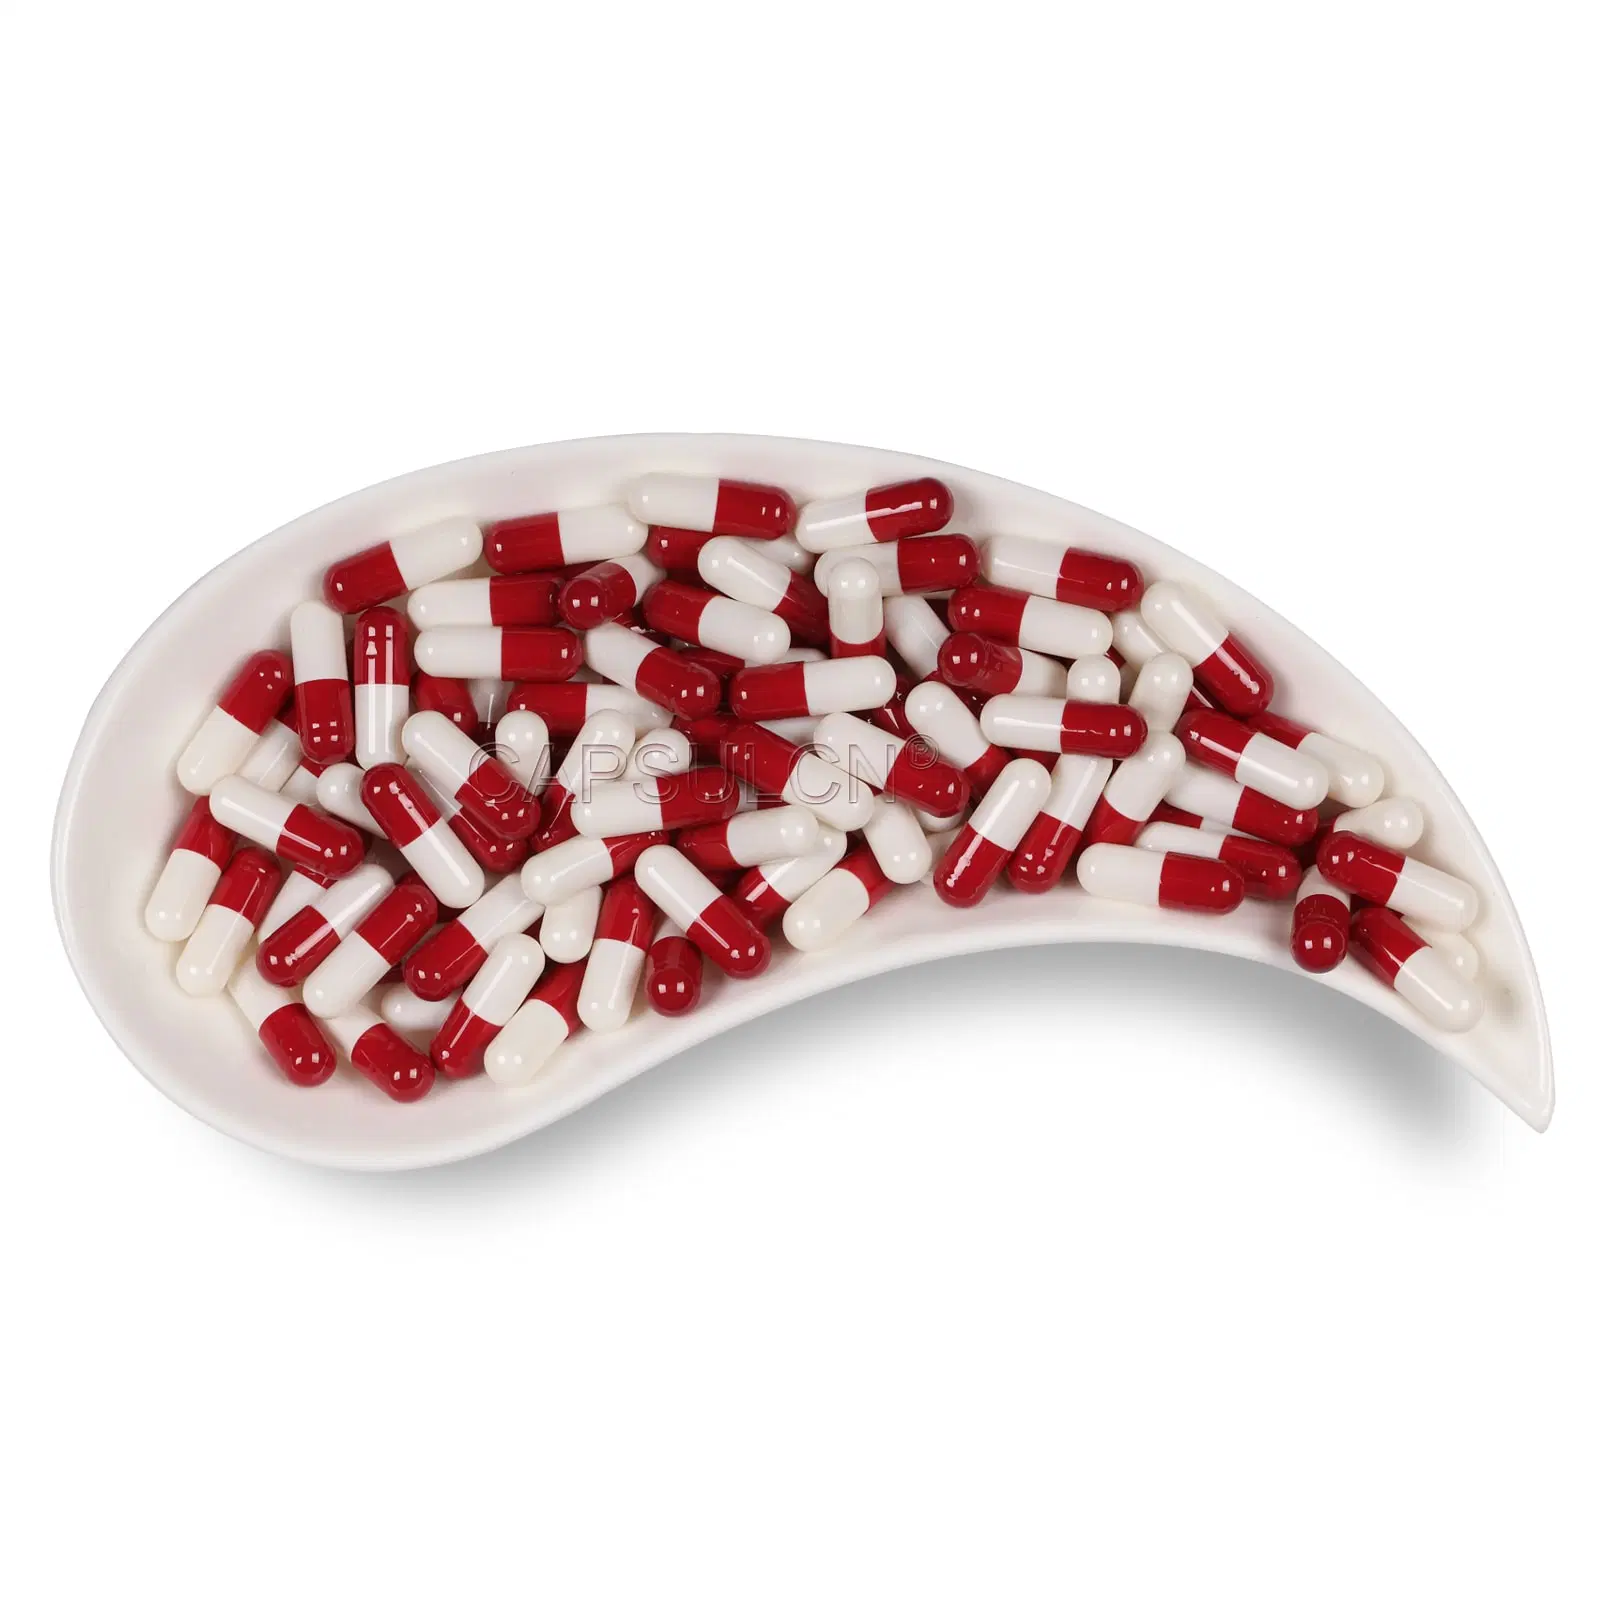 Capsulcn Have Separated Capsule Empty Hard Gelatin Capsules Size 00 Mix of Red and White Colour Can Be Customized